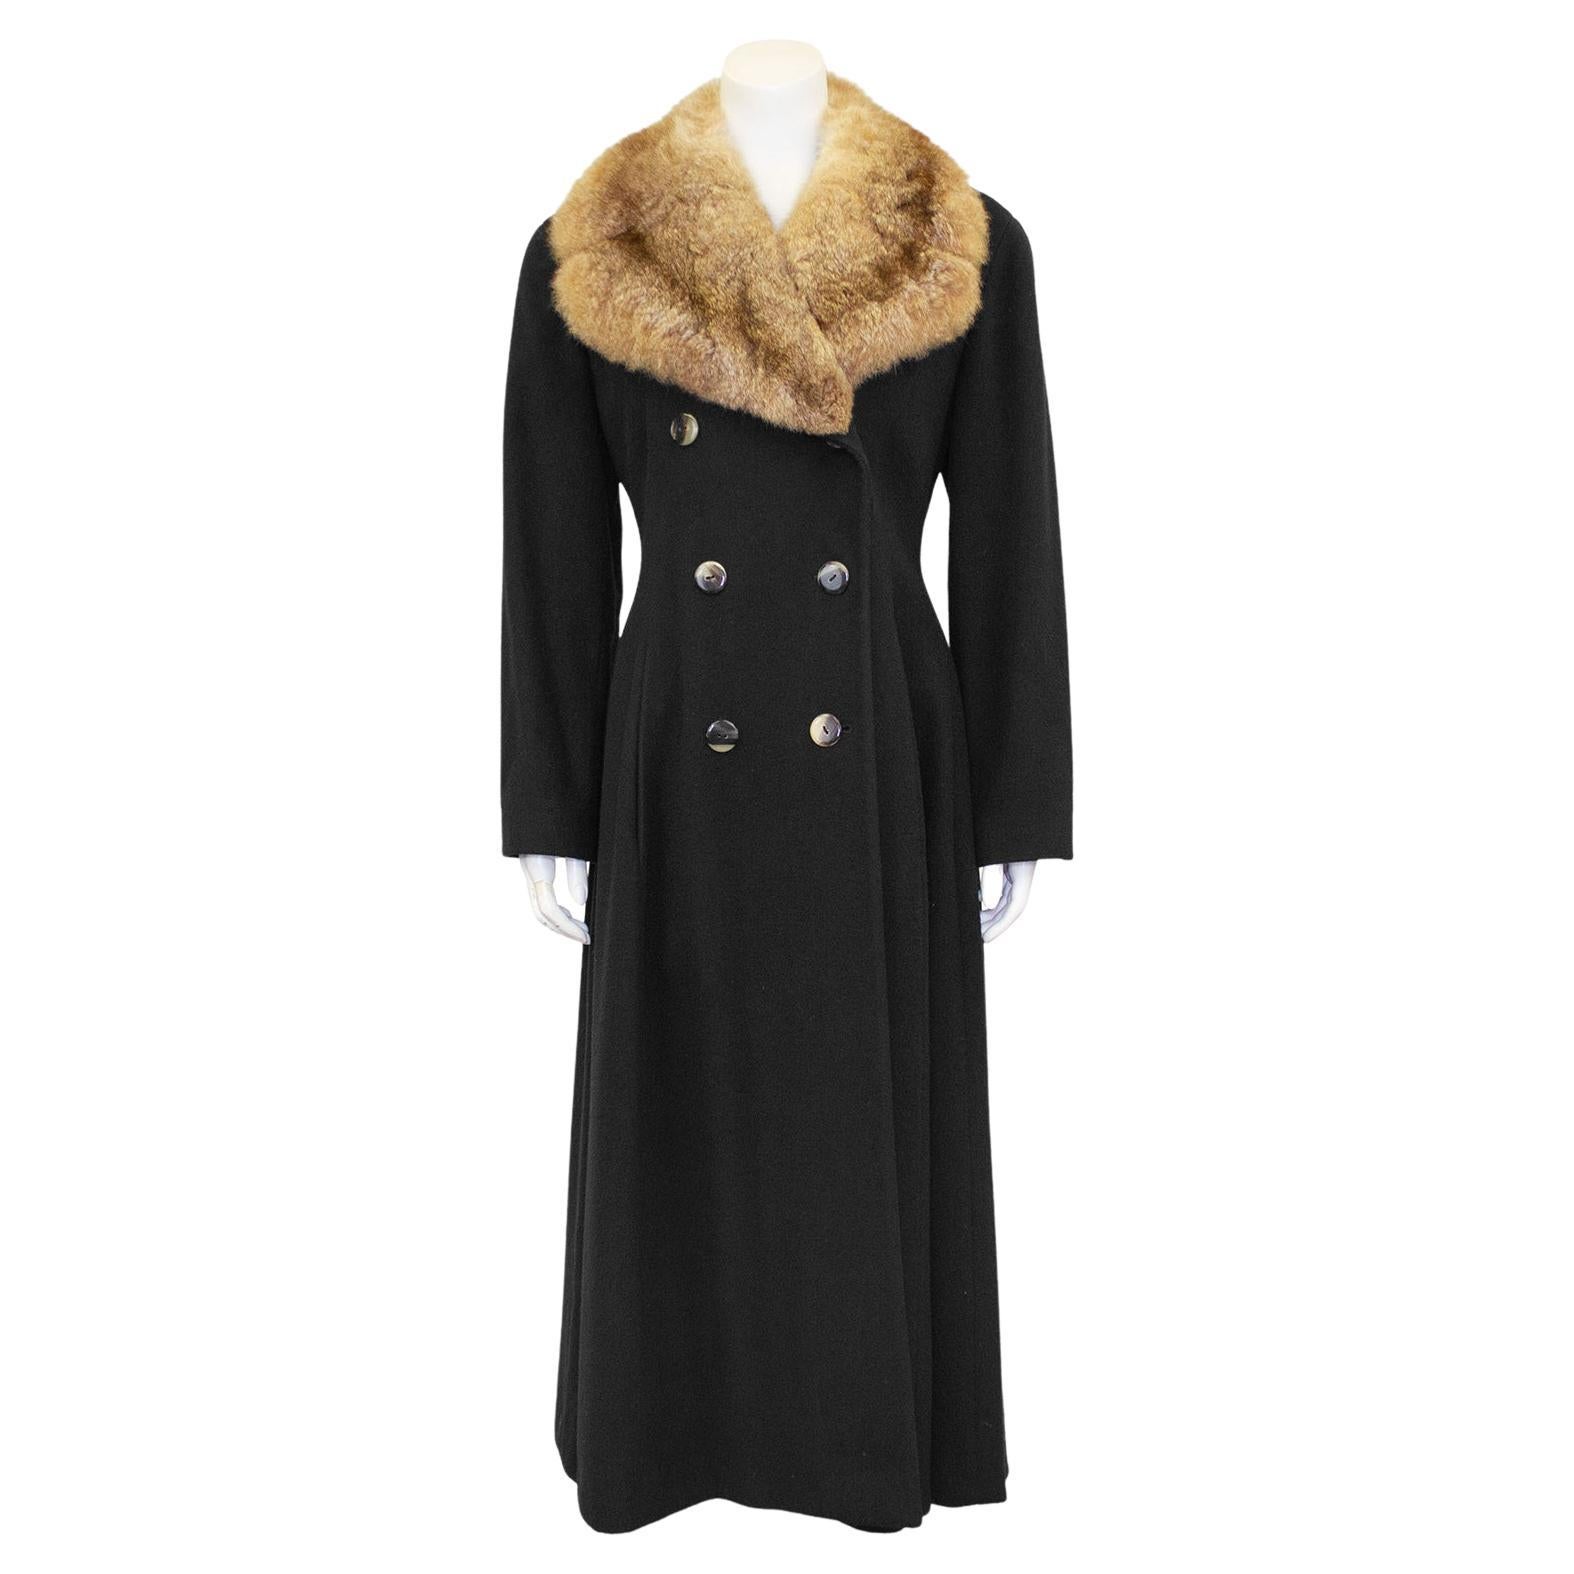 Perry Ellis 1980's Maxi Length Princess Style Coat with Fur Collar For Sale